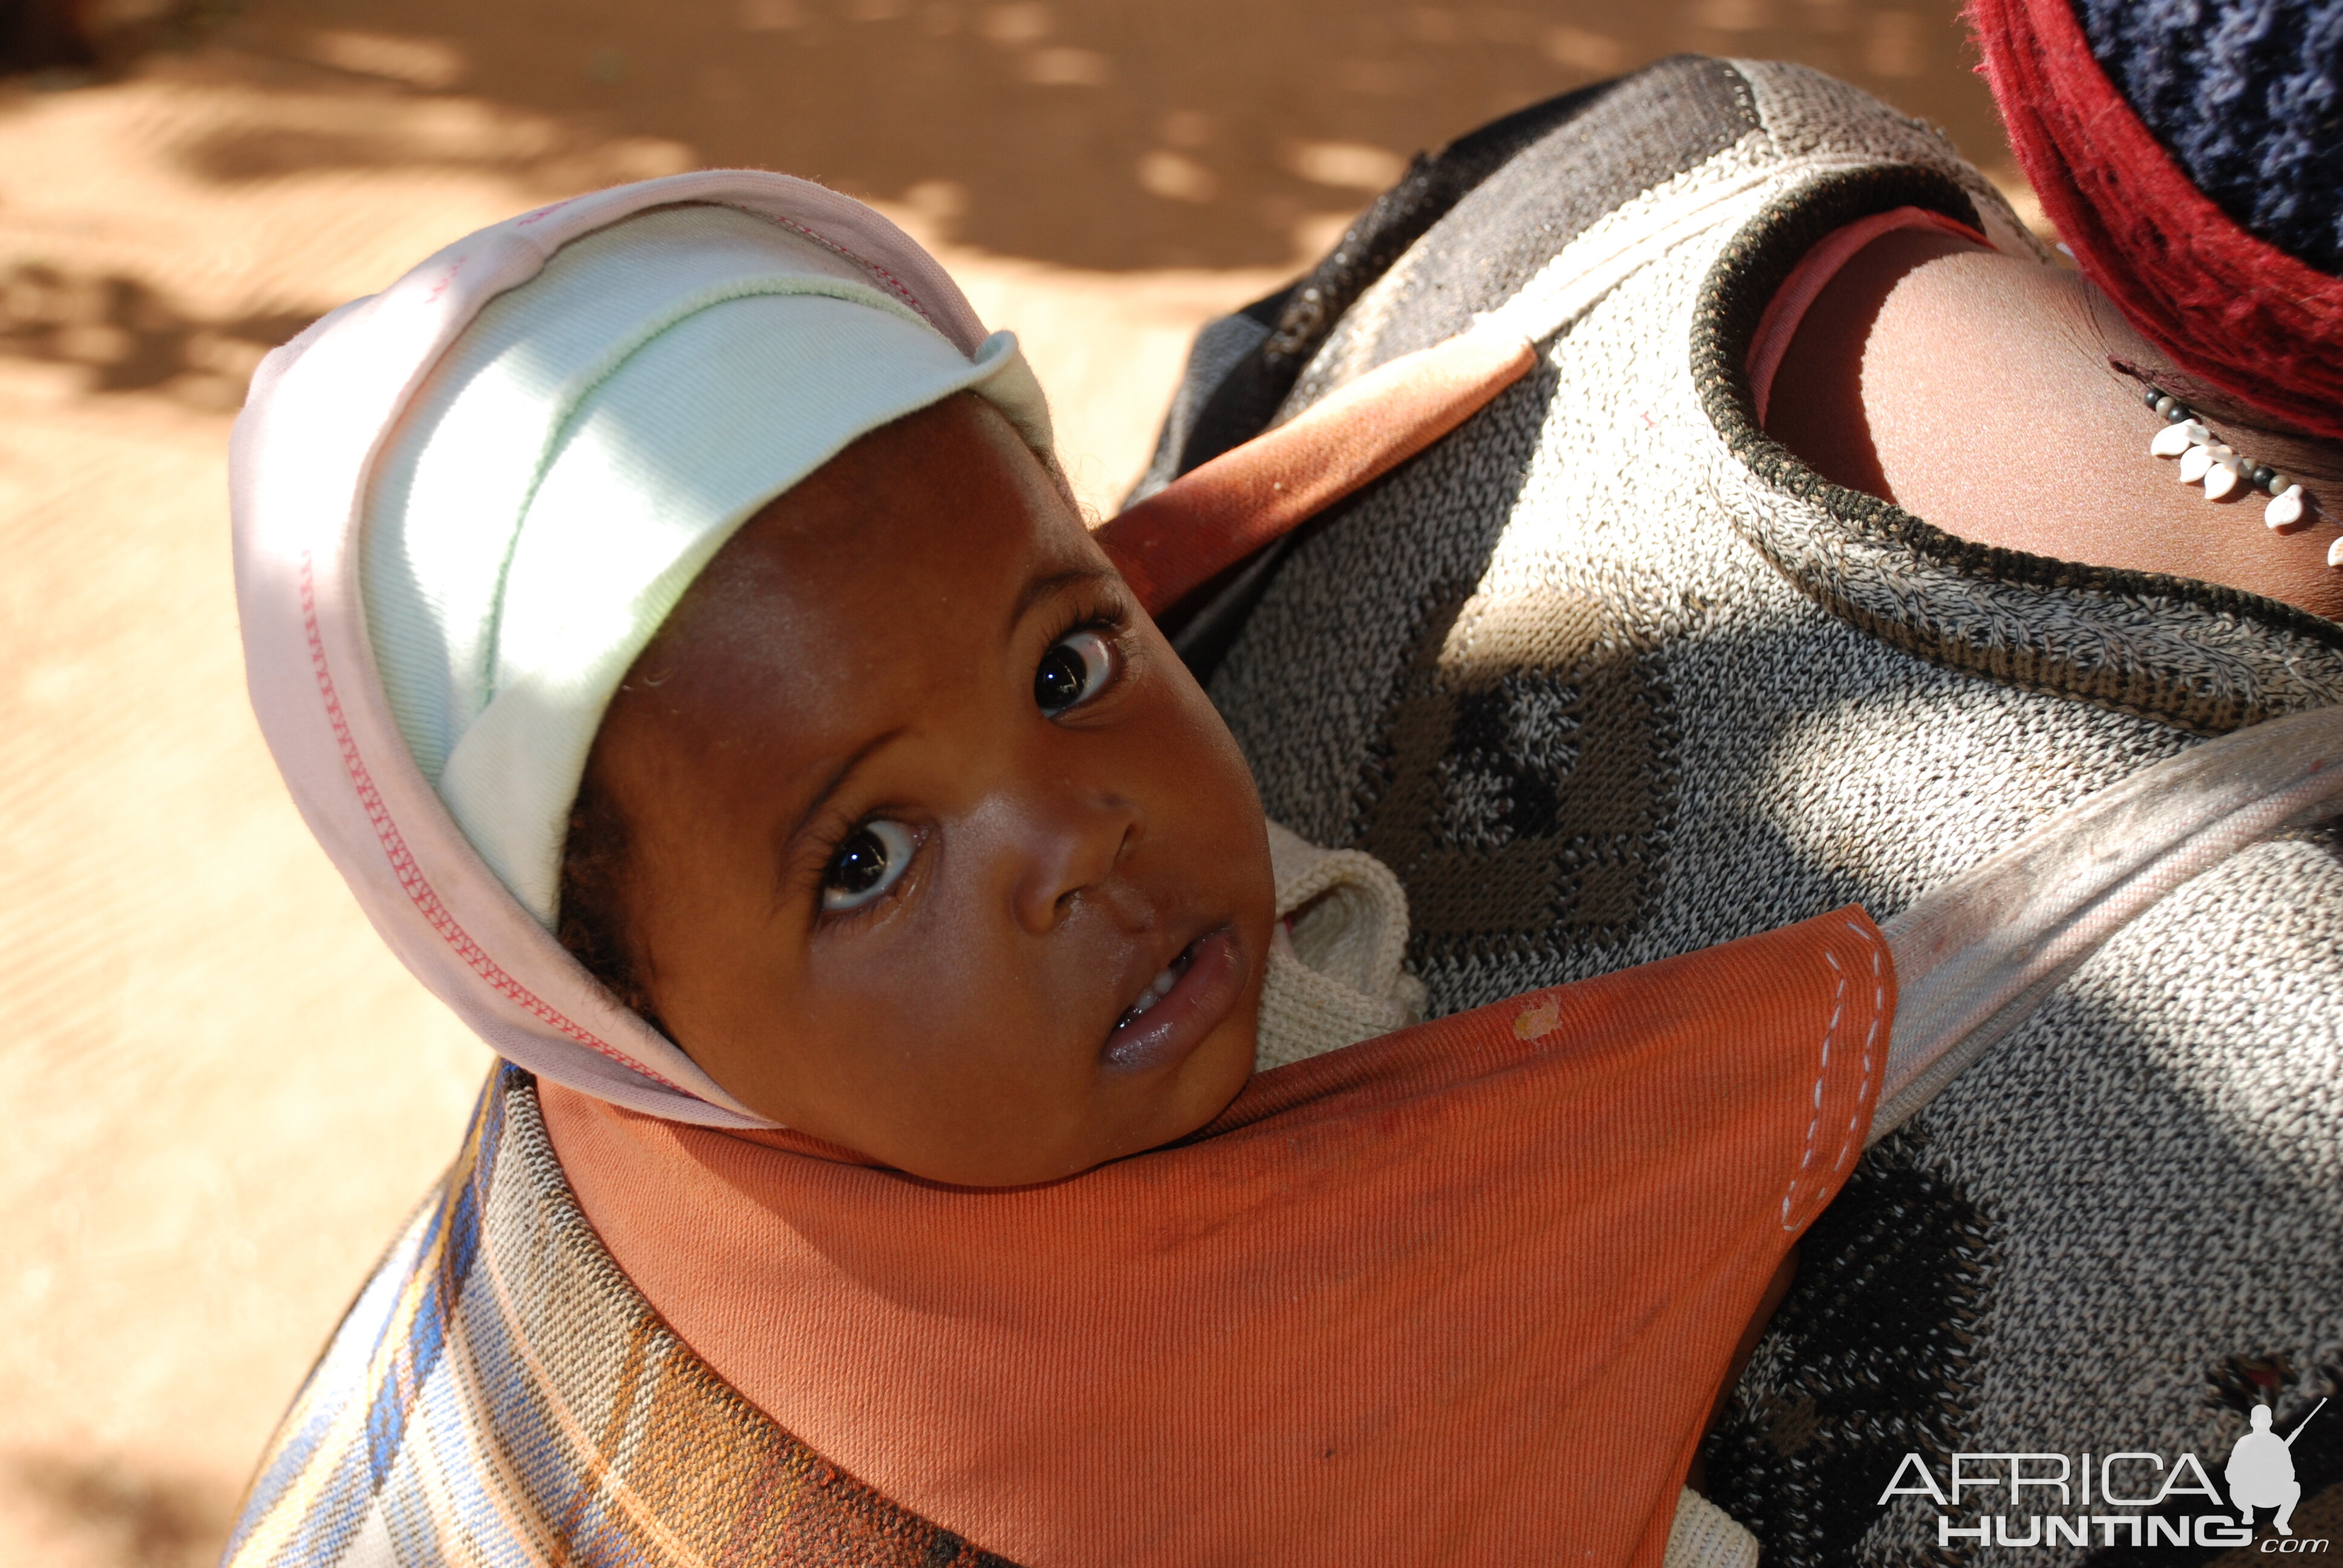 Infant in Namibia